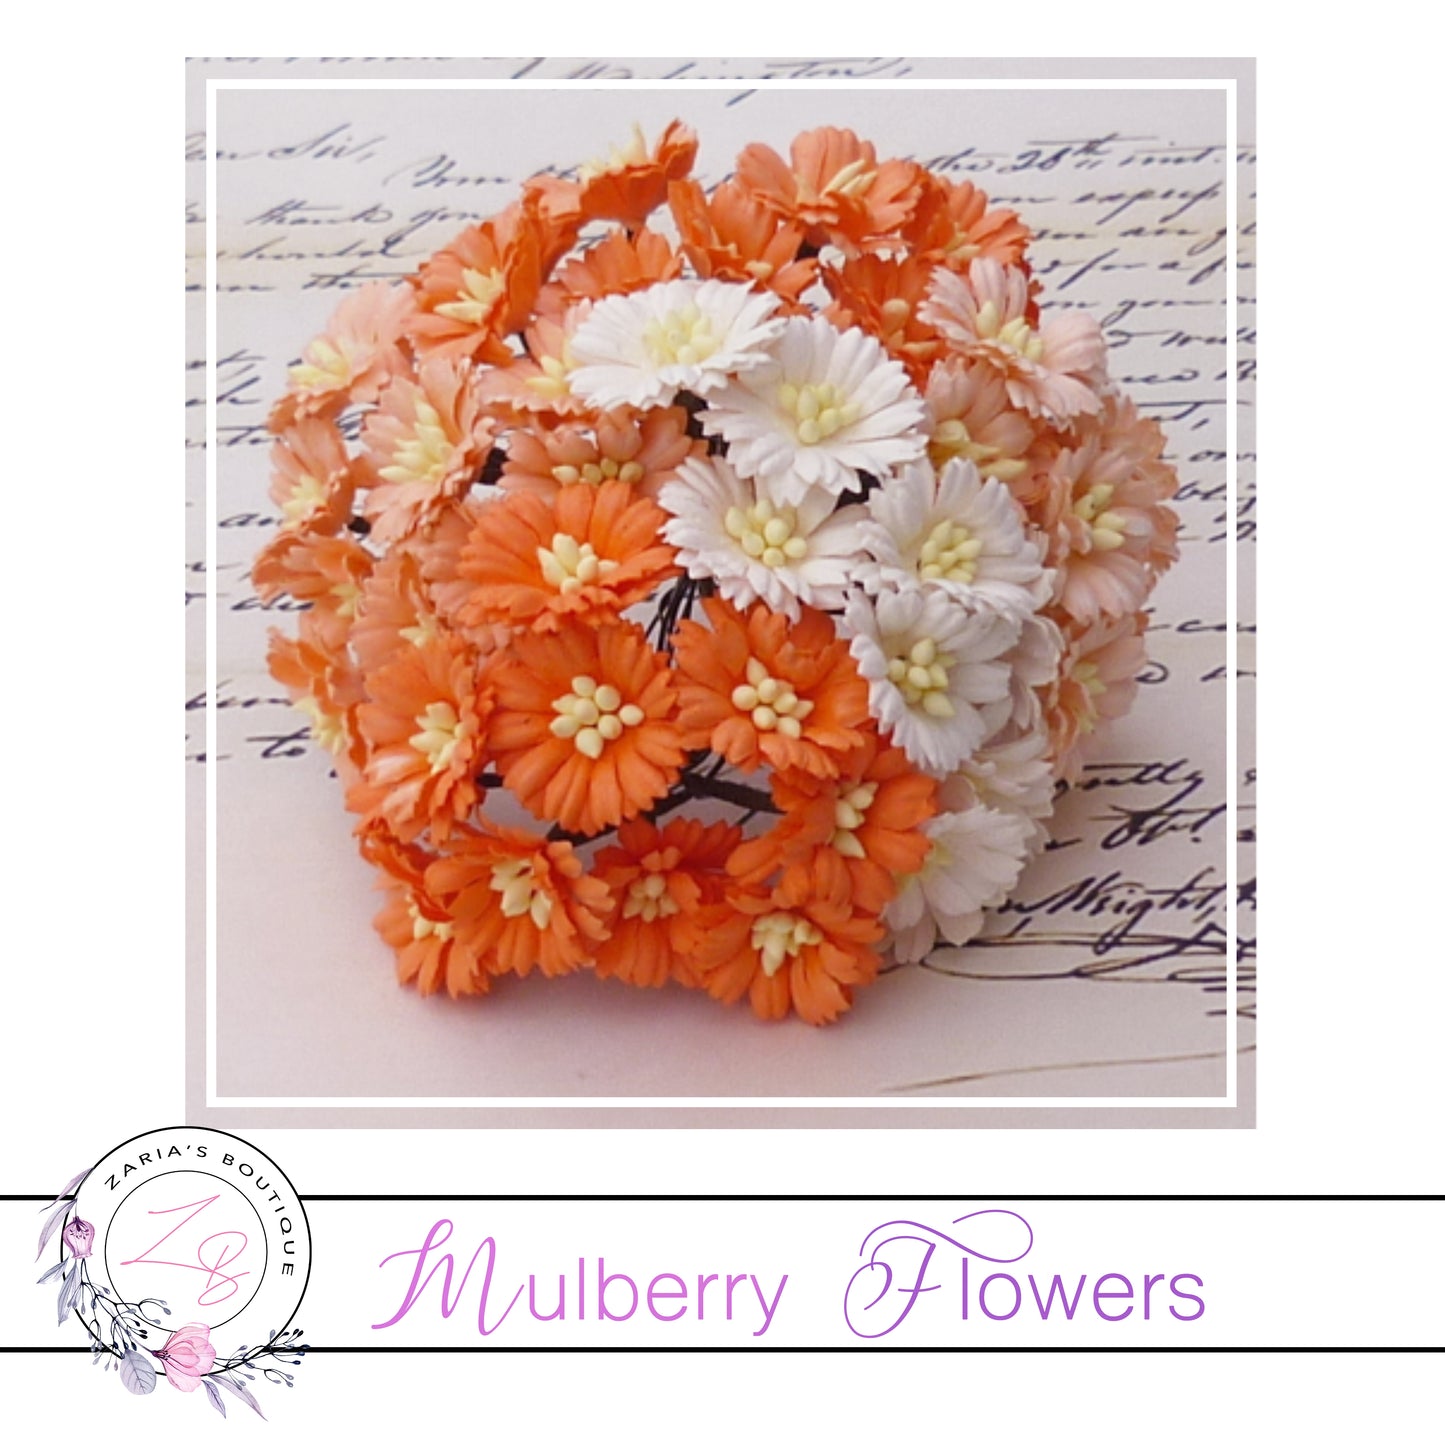 Mulberry Paper Flowers ~ Cosmos Daisy ~ 25mm ~ Mixed Orange/White